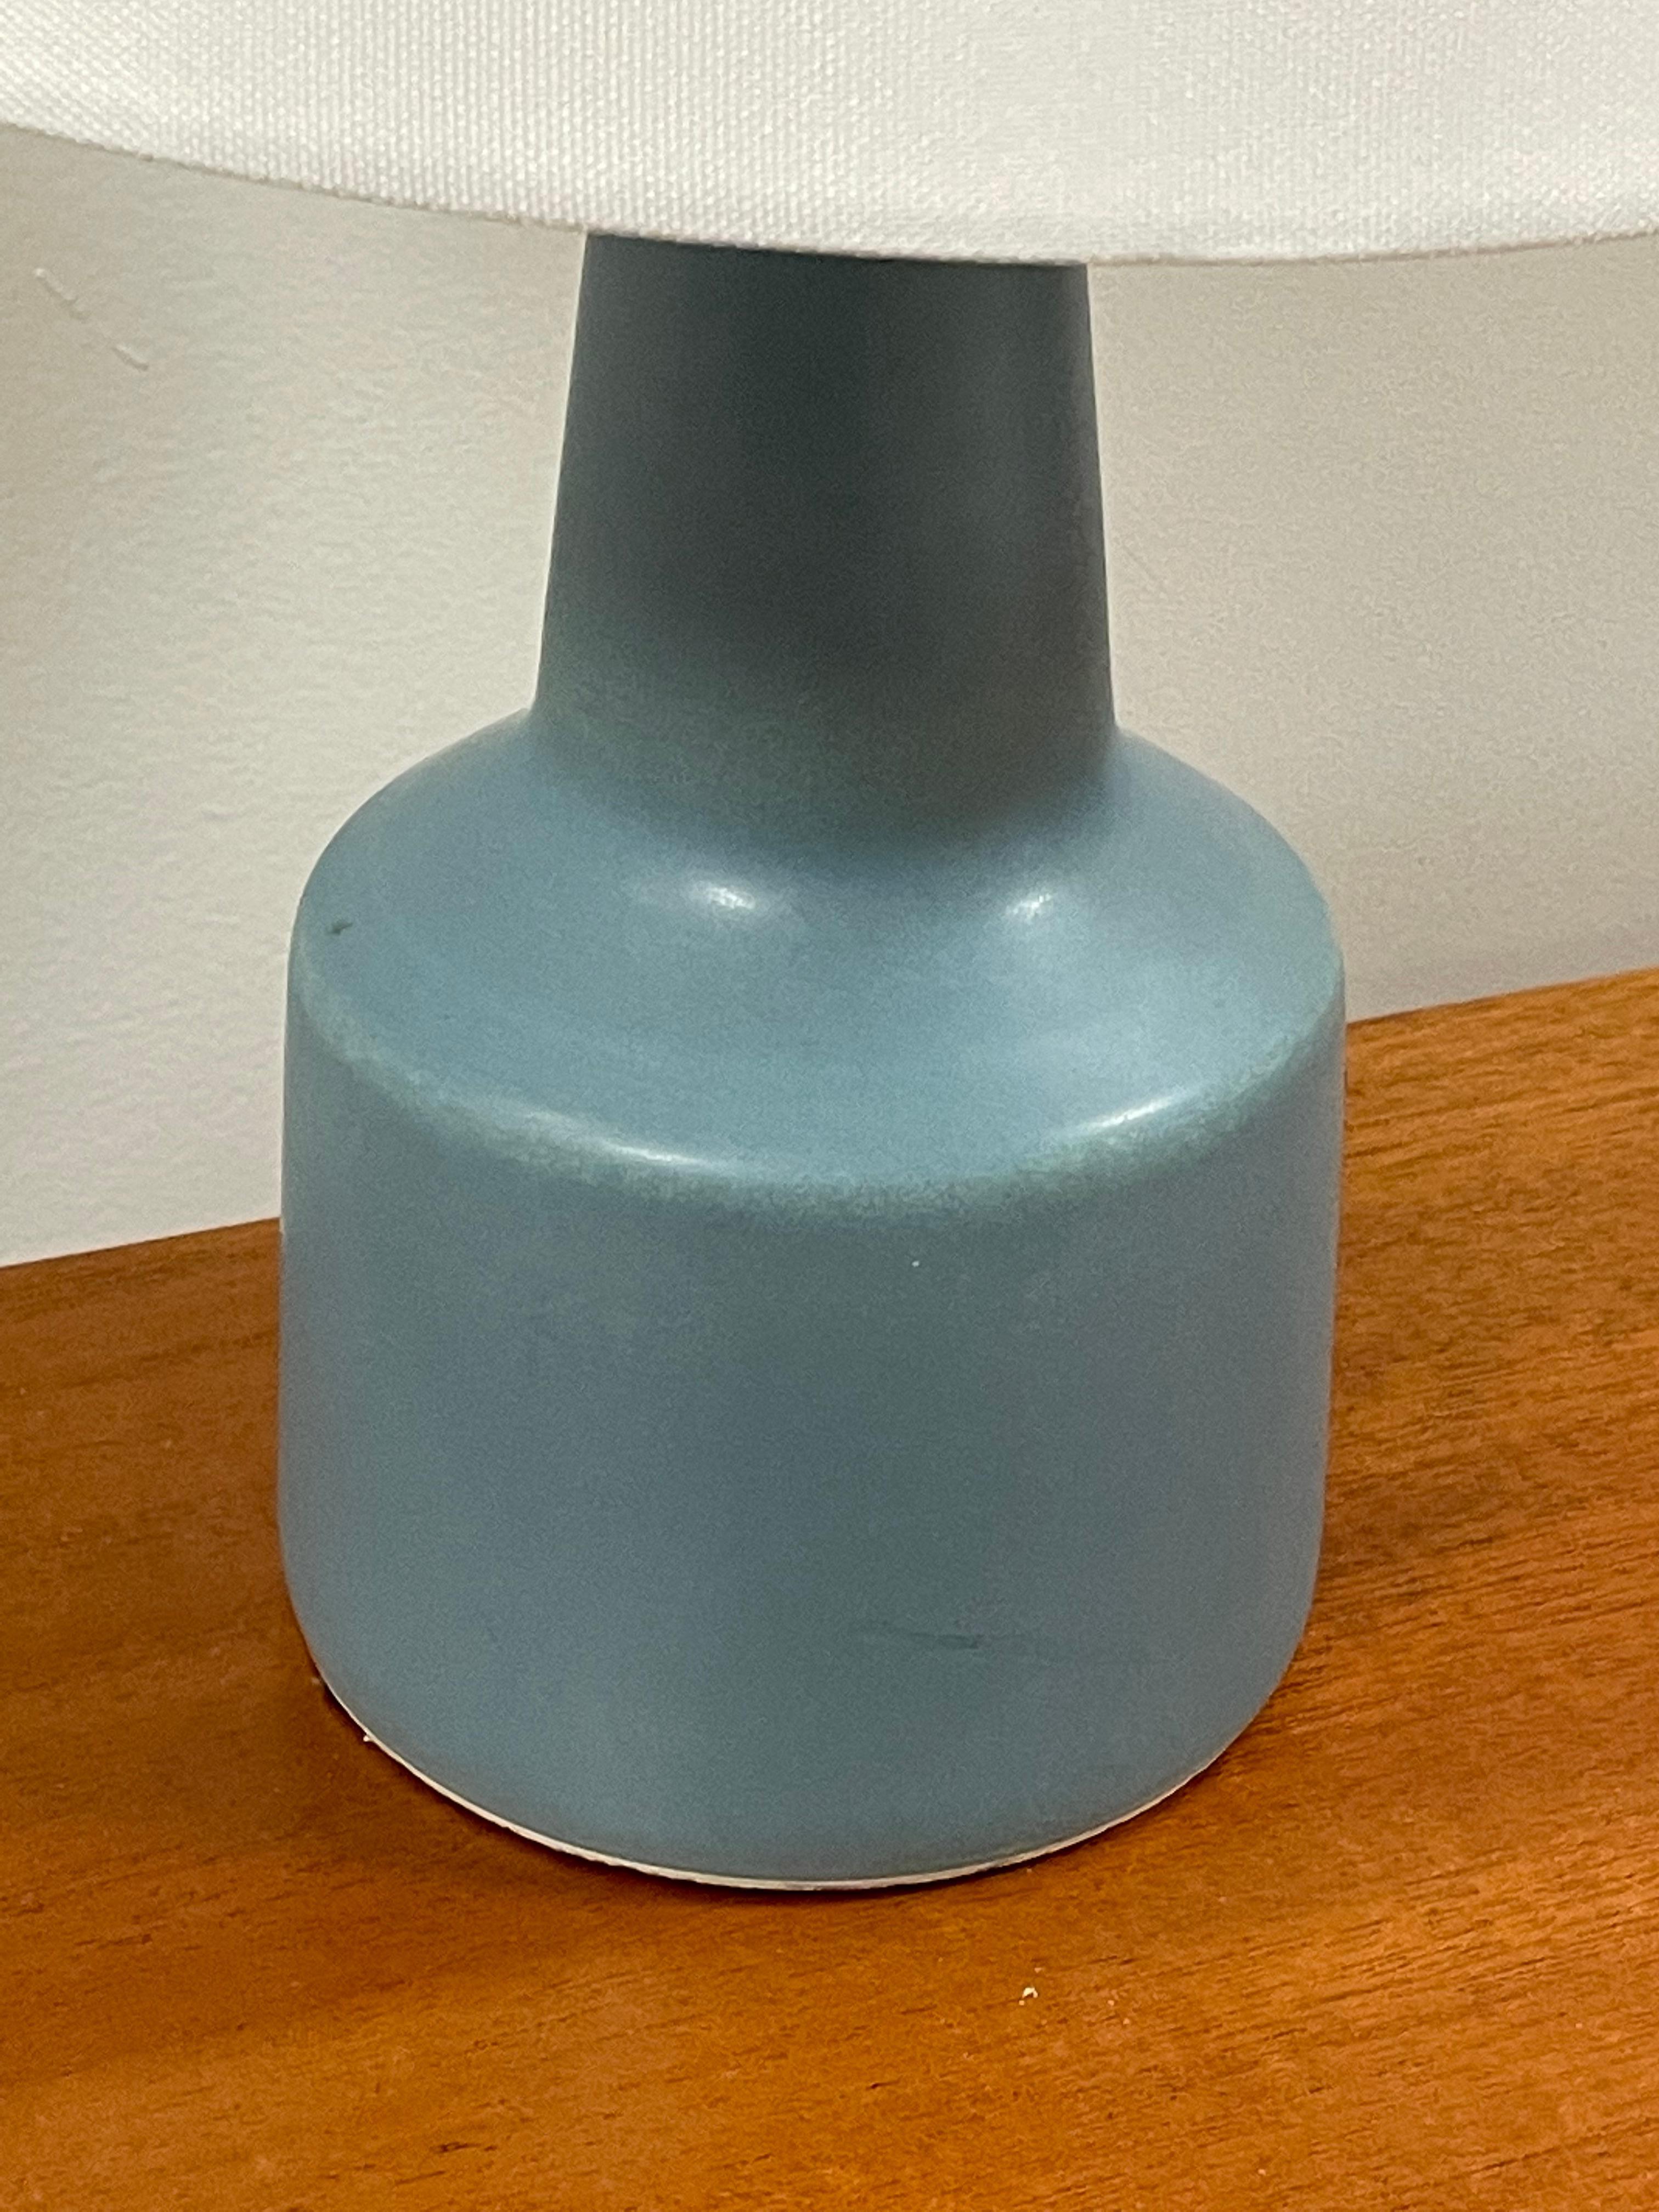 A table lamp designed by Lotte and Gunnar Bostlund, 1960s. Unique color and size makes for a wonderful example.

Overall
15.25” tall
10” wide

Lamp only
11.25” socket
4.75” wide.